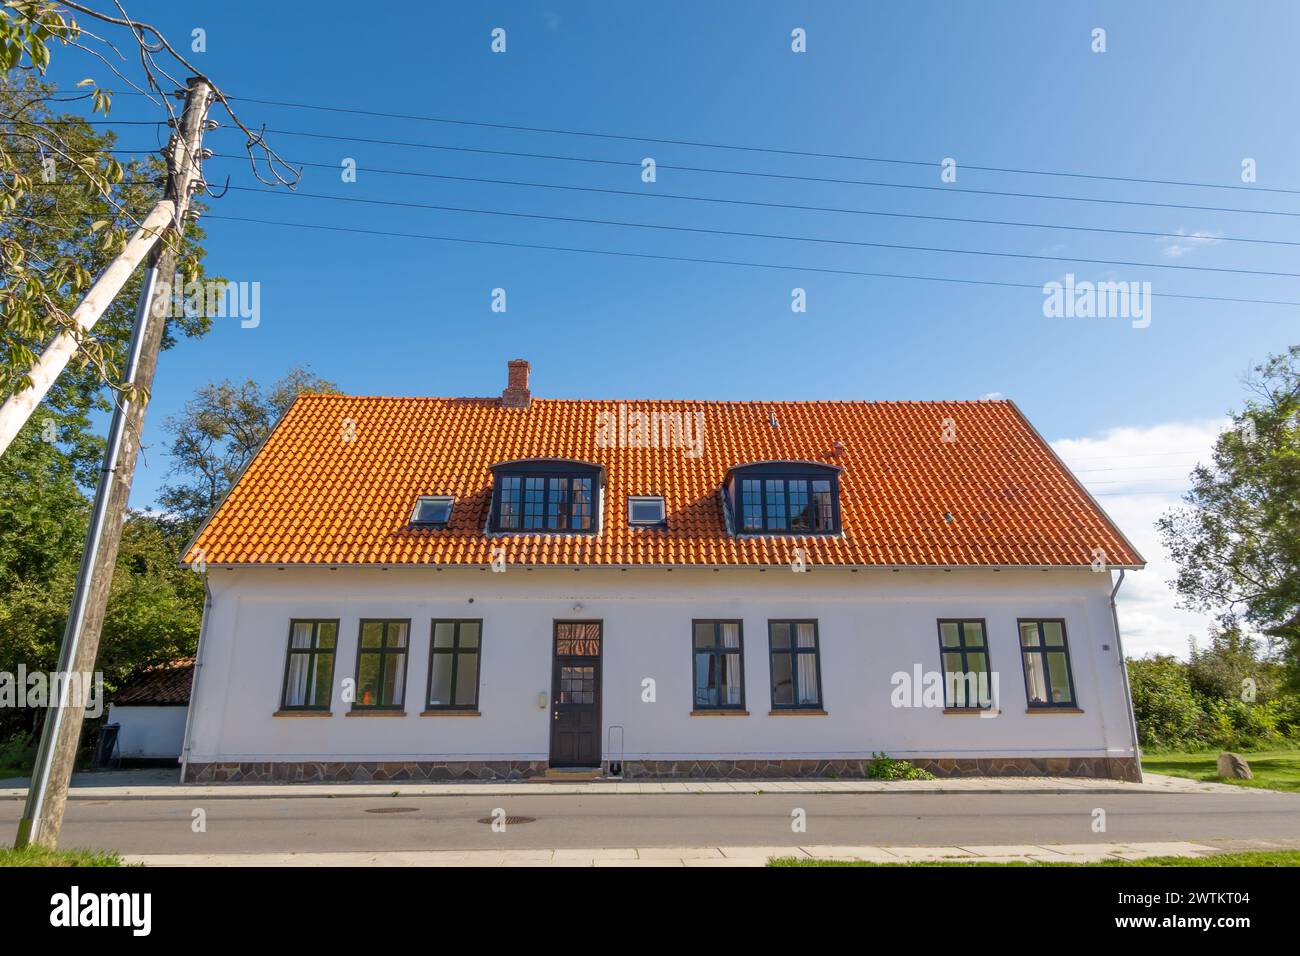 White house with red roof tiles and overhead electricity wires along the street on Livø island, Limfjord, Nordjylland, Denmark Stock Photo